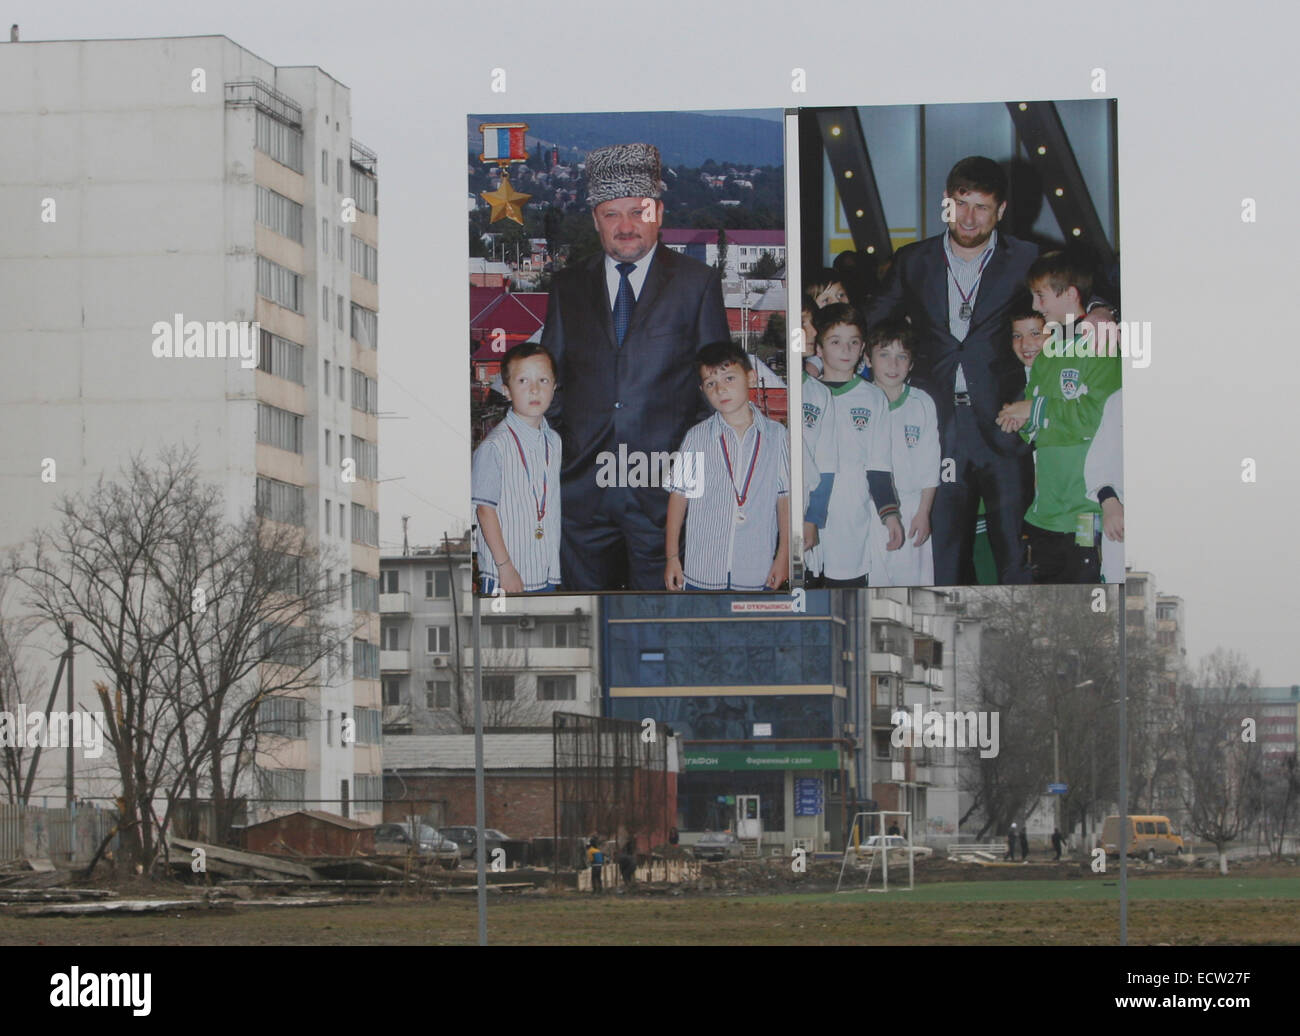 Billboard showing the former Chechen president Achmat Kadyrov and his son, the current president Ramzan Kadyrov, at the Ramzan Football Academy in the Chechen capital Grozny, Russia Stock Photo